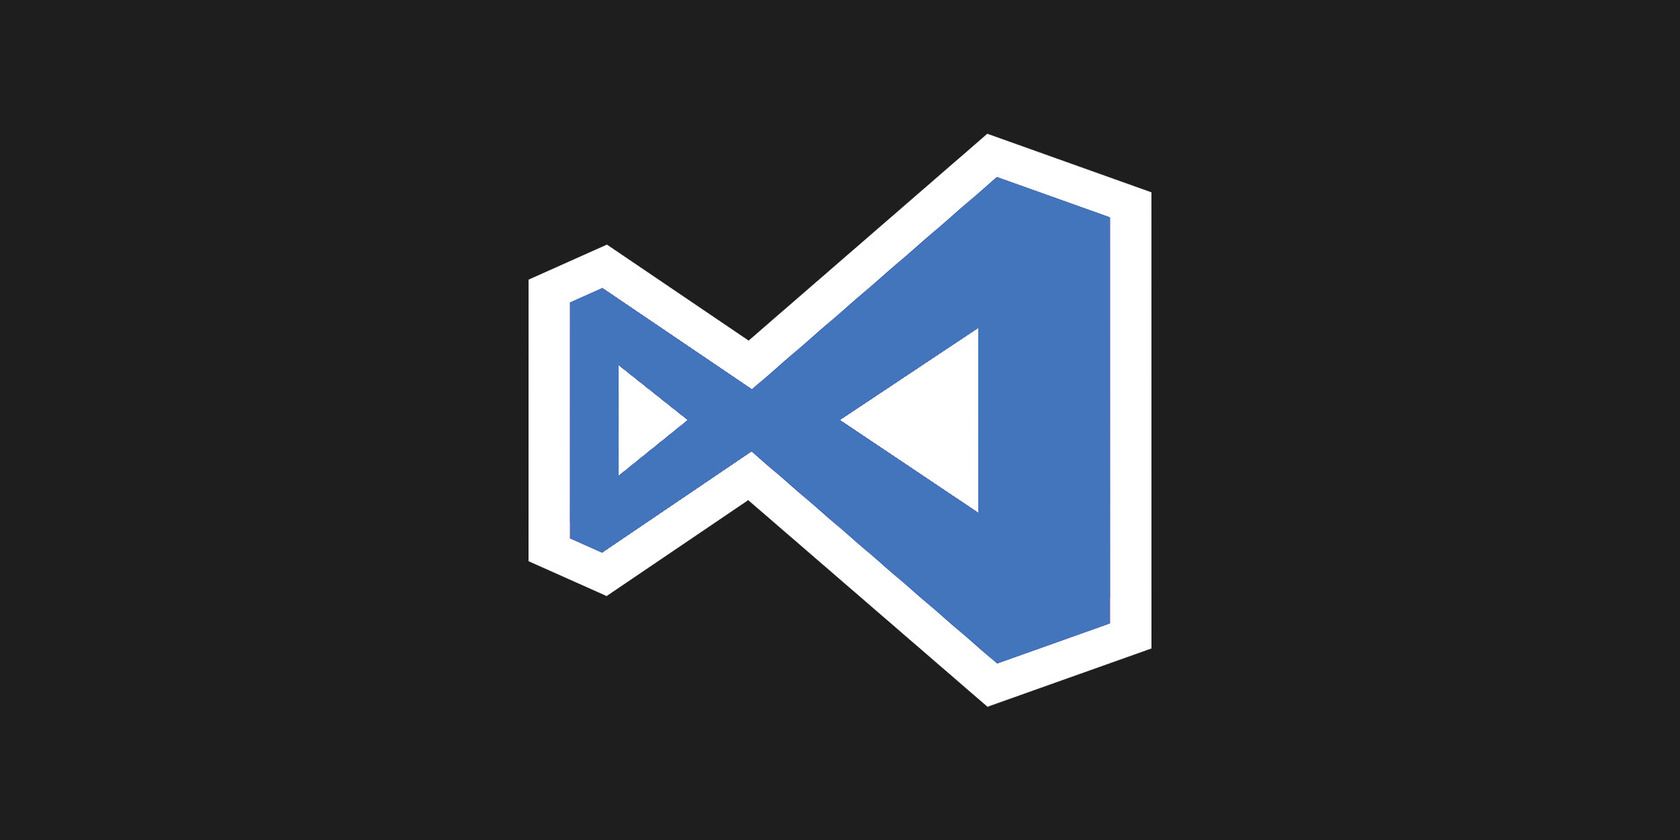 A dark background with a blue and white logo for visual studio code